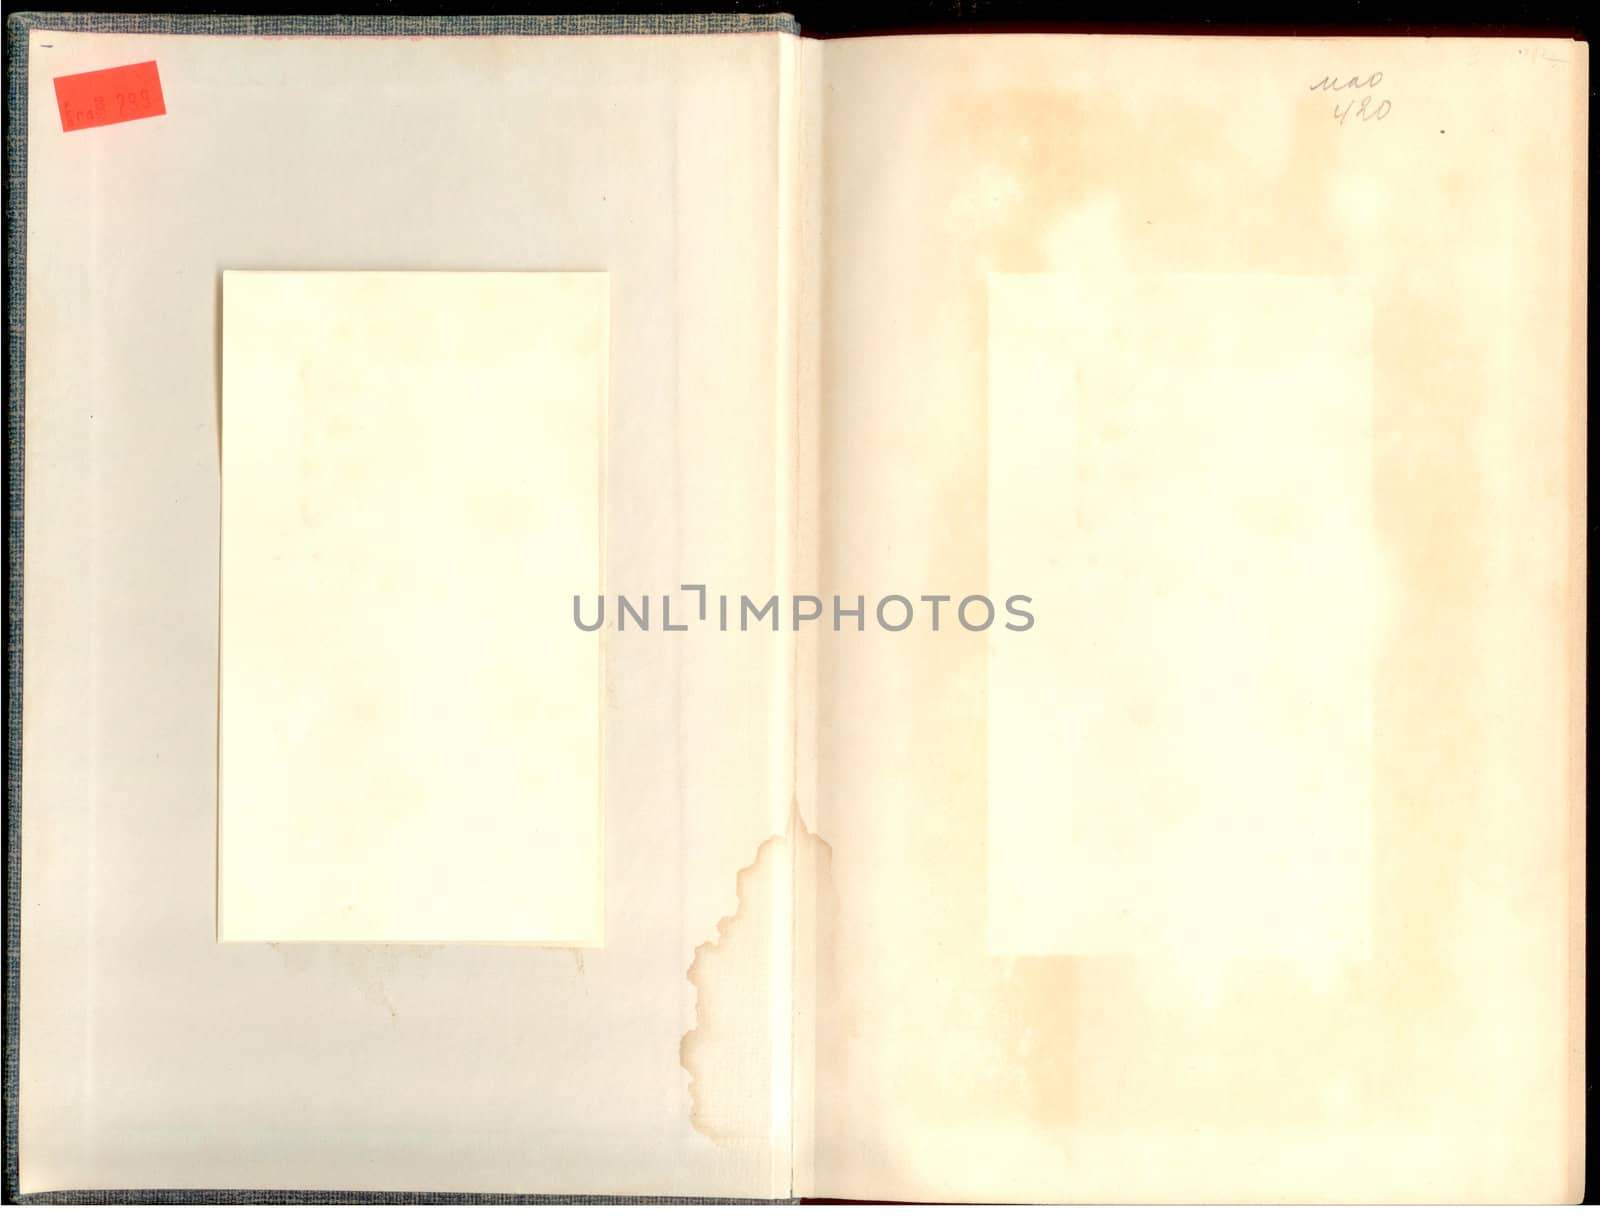 Old antique paper from a book or note pad blank retro background